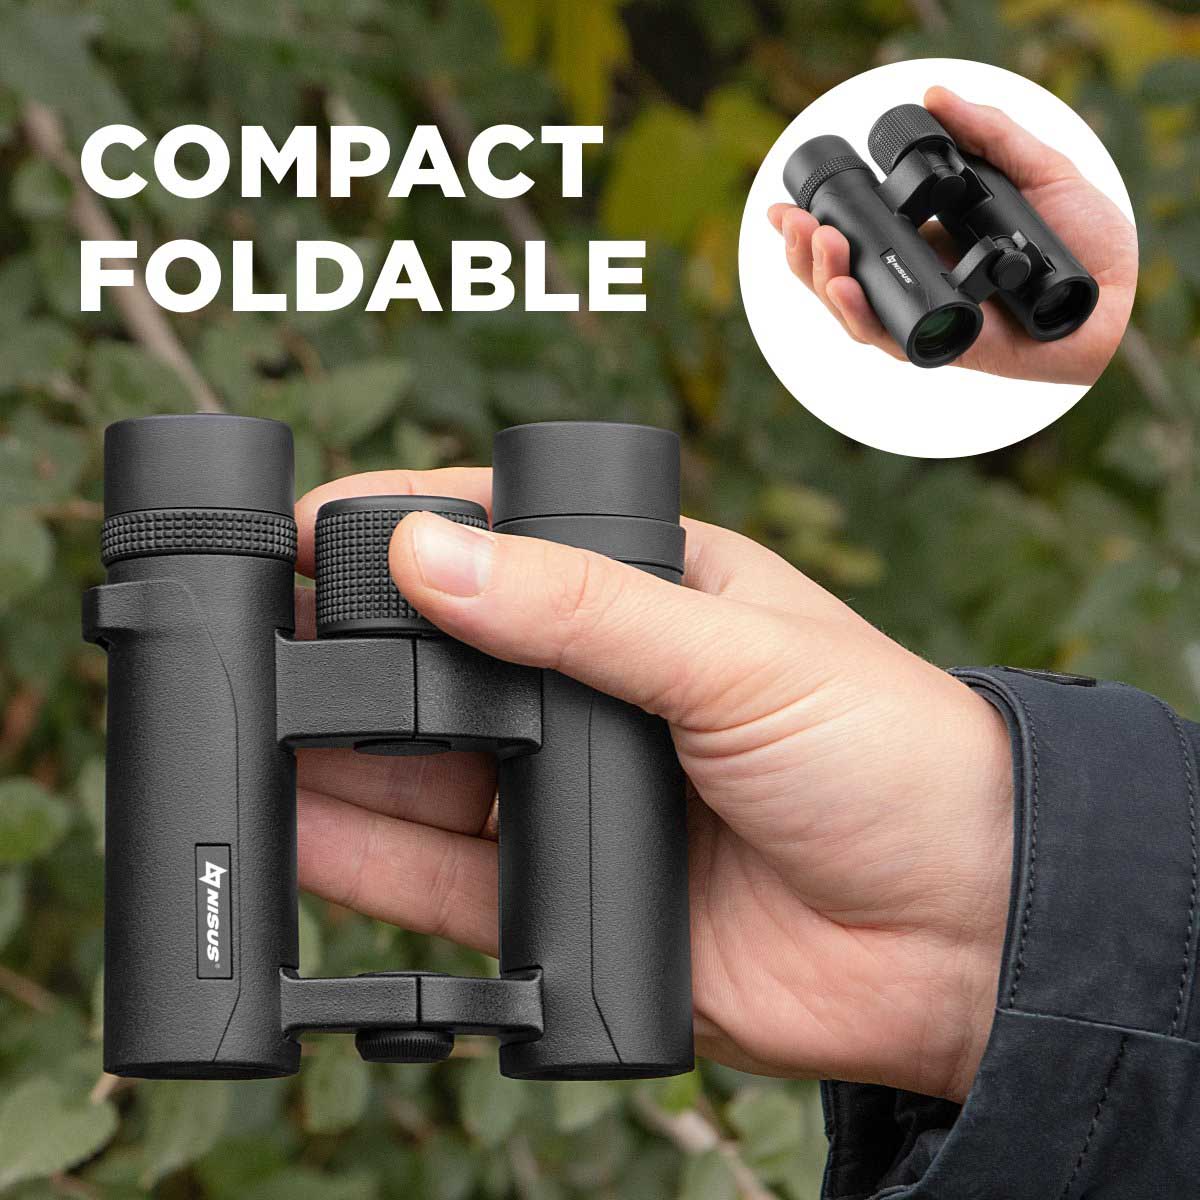 8x26 Compact Folding Binoculars with a Travel Case is pretty compact and foldable